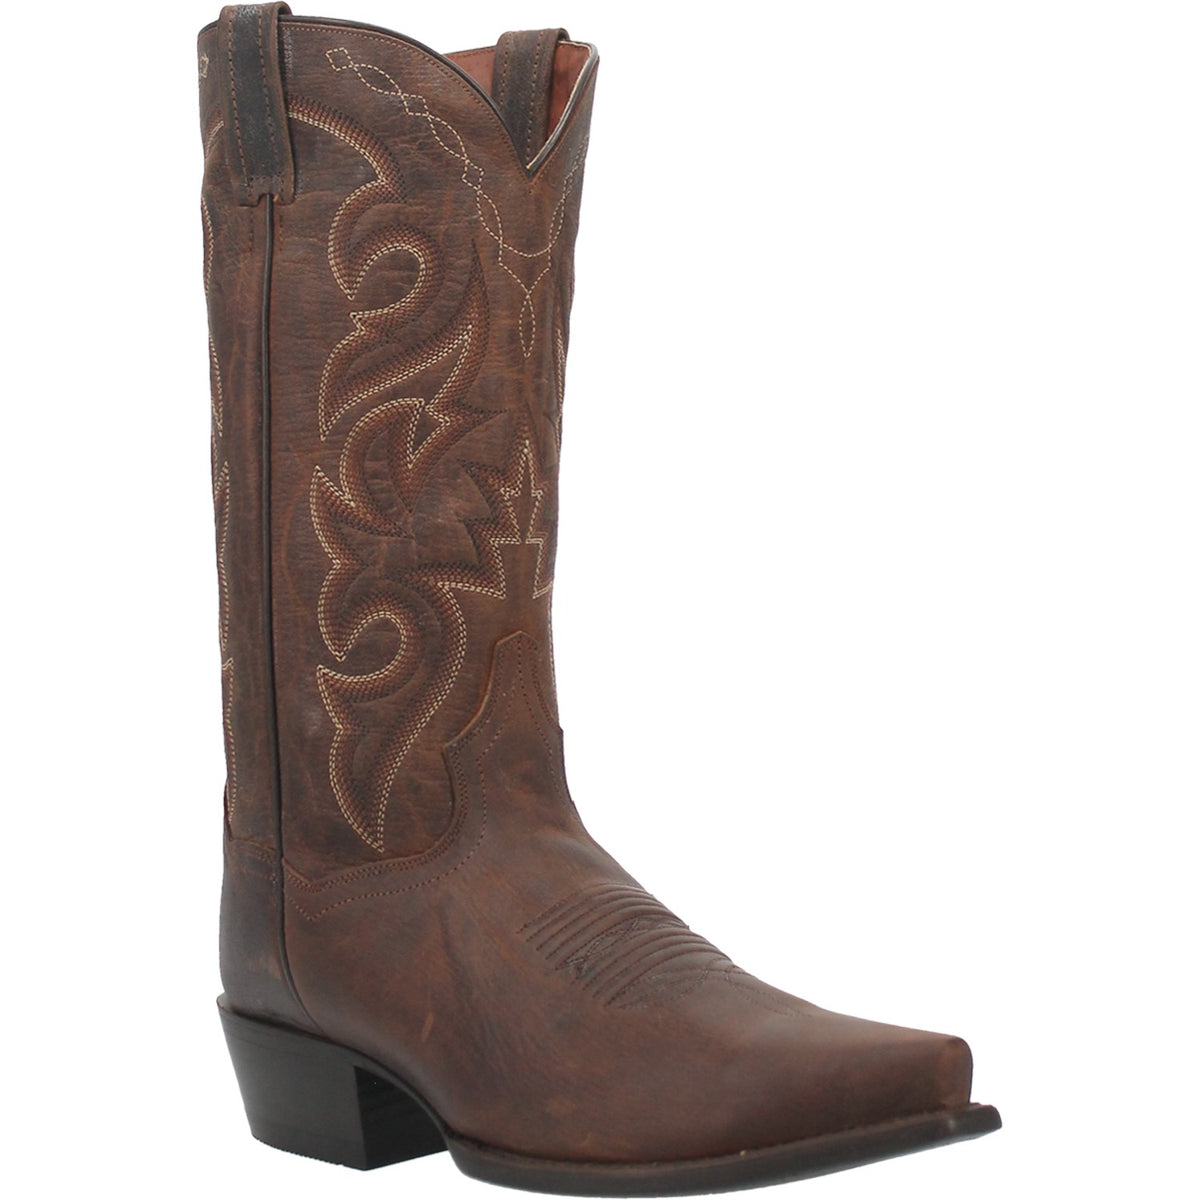 RENEGADE S LEATHER BOOT Cover